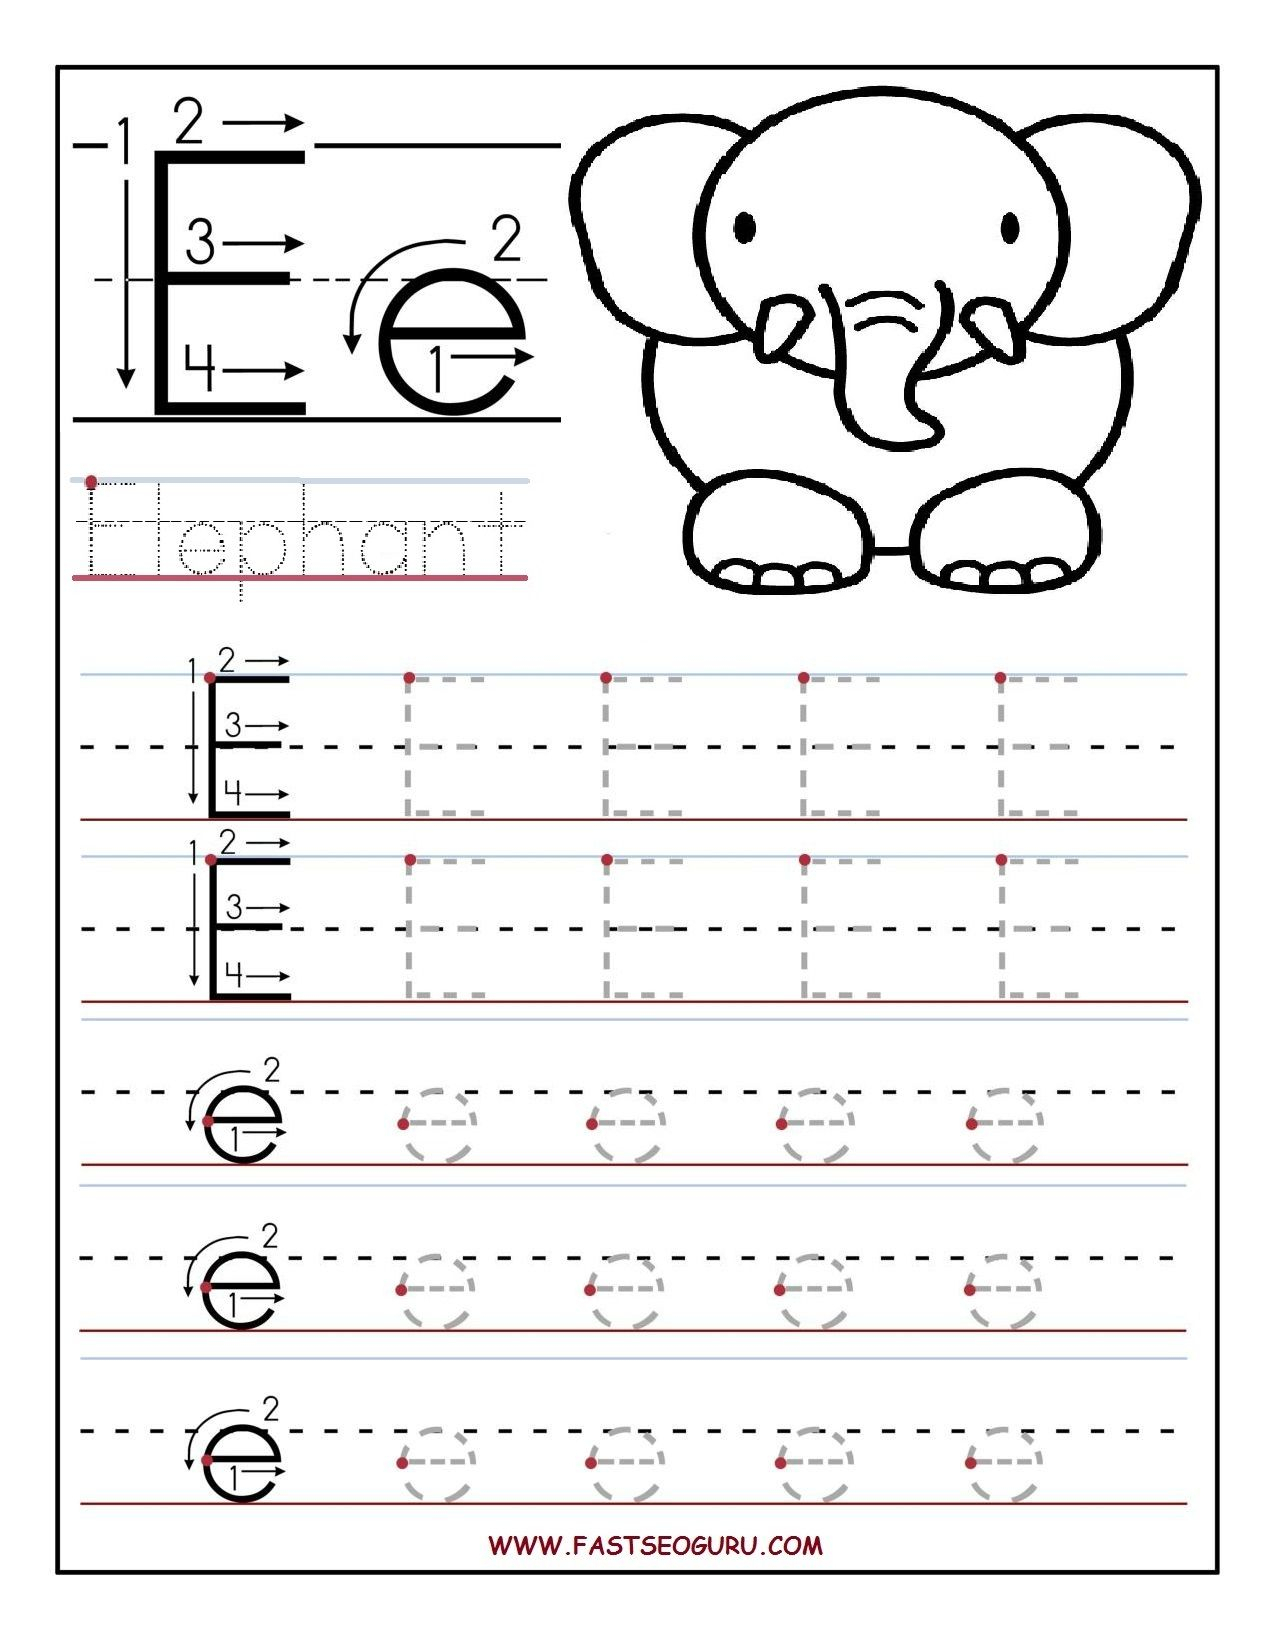 32-fun-letter-e-worksheets-kitty-baby-love